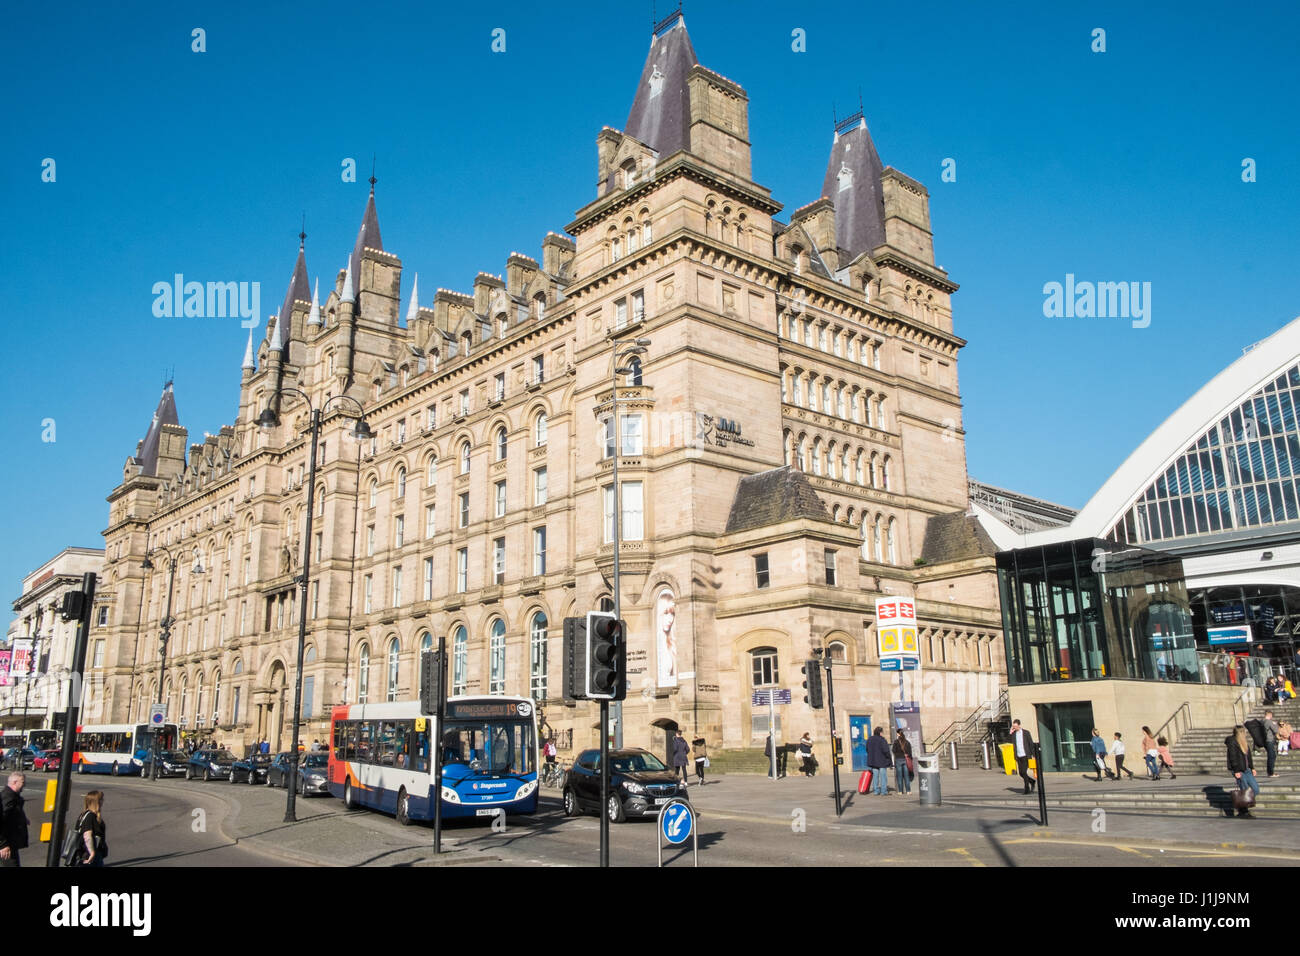 Student,accommodation,in,building,next to,Lime Street,train,station,Liverpool,Merseyside,England,City,City,Northern,North,England,English,UK.,U.K. Stock Photo